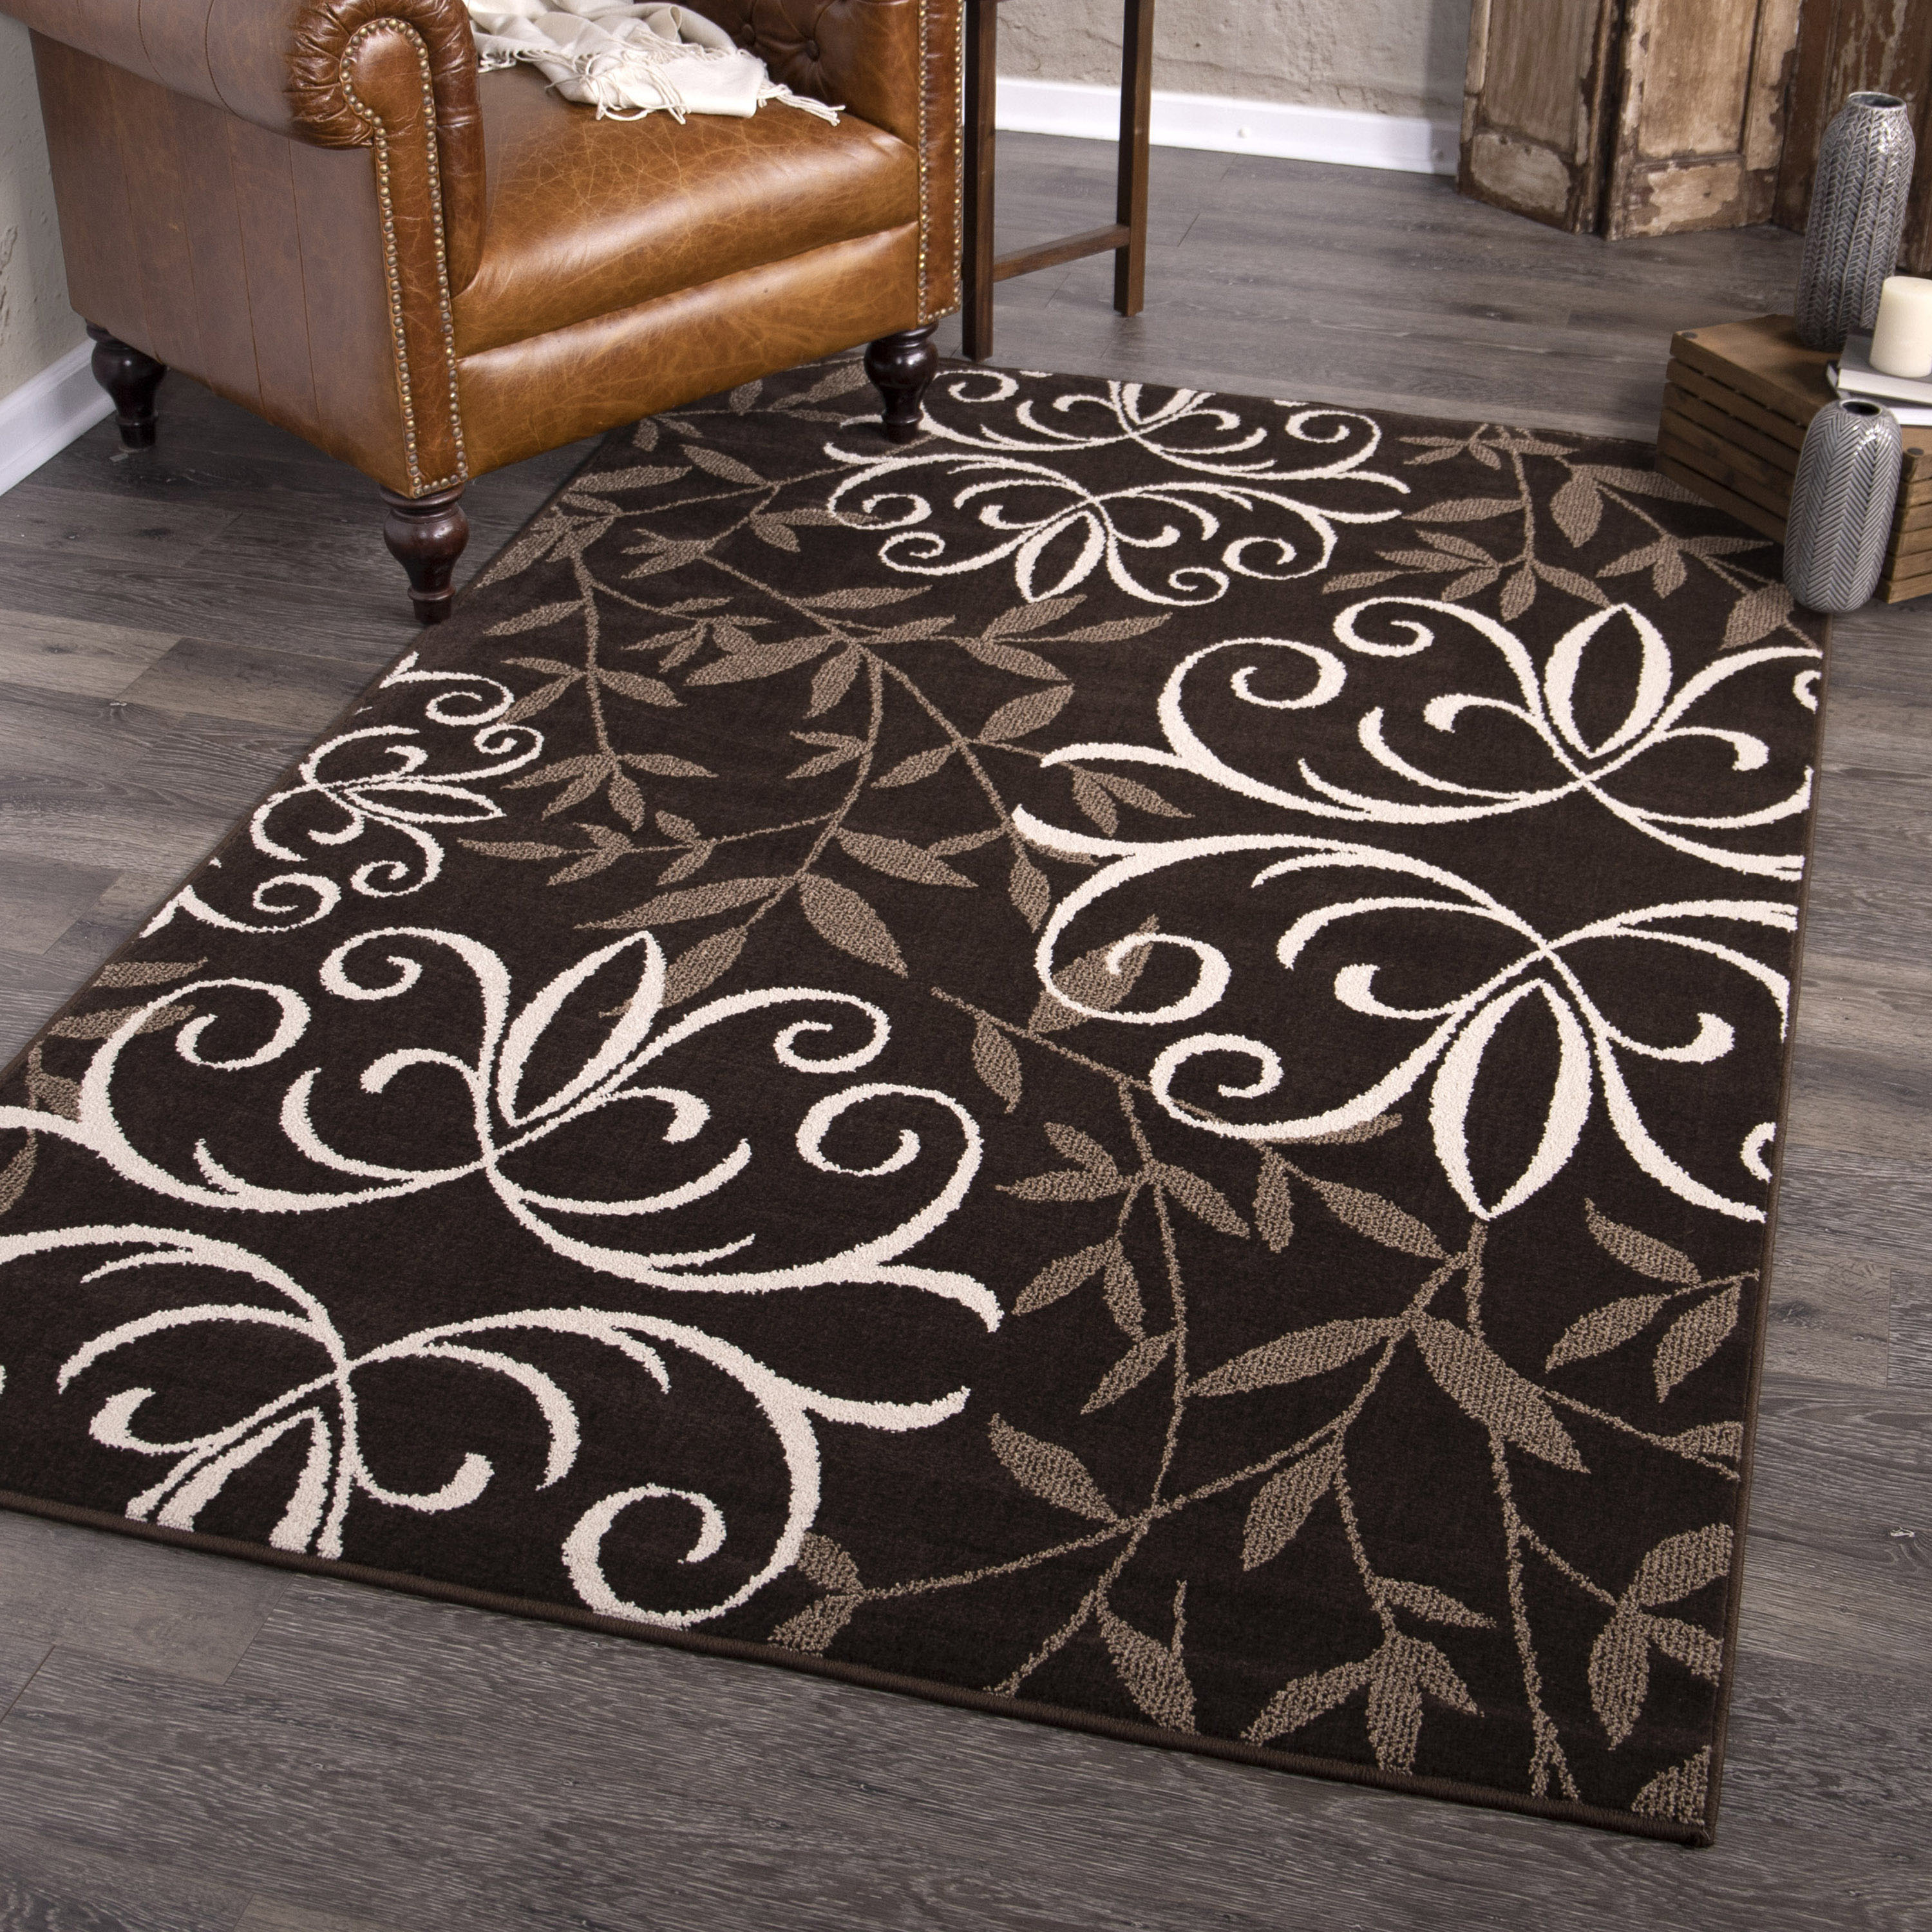 Better Homes & Gardens Iron Fleur Area Rug, Brown, 6'7" x 9'8" - image 1 of 10